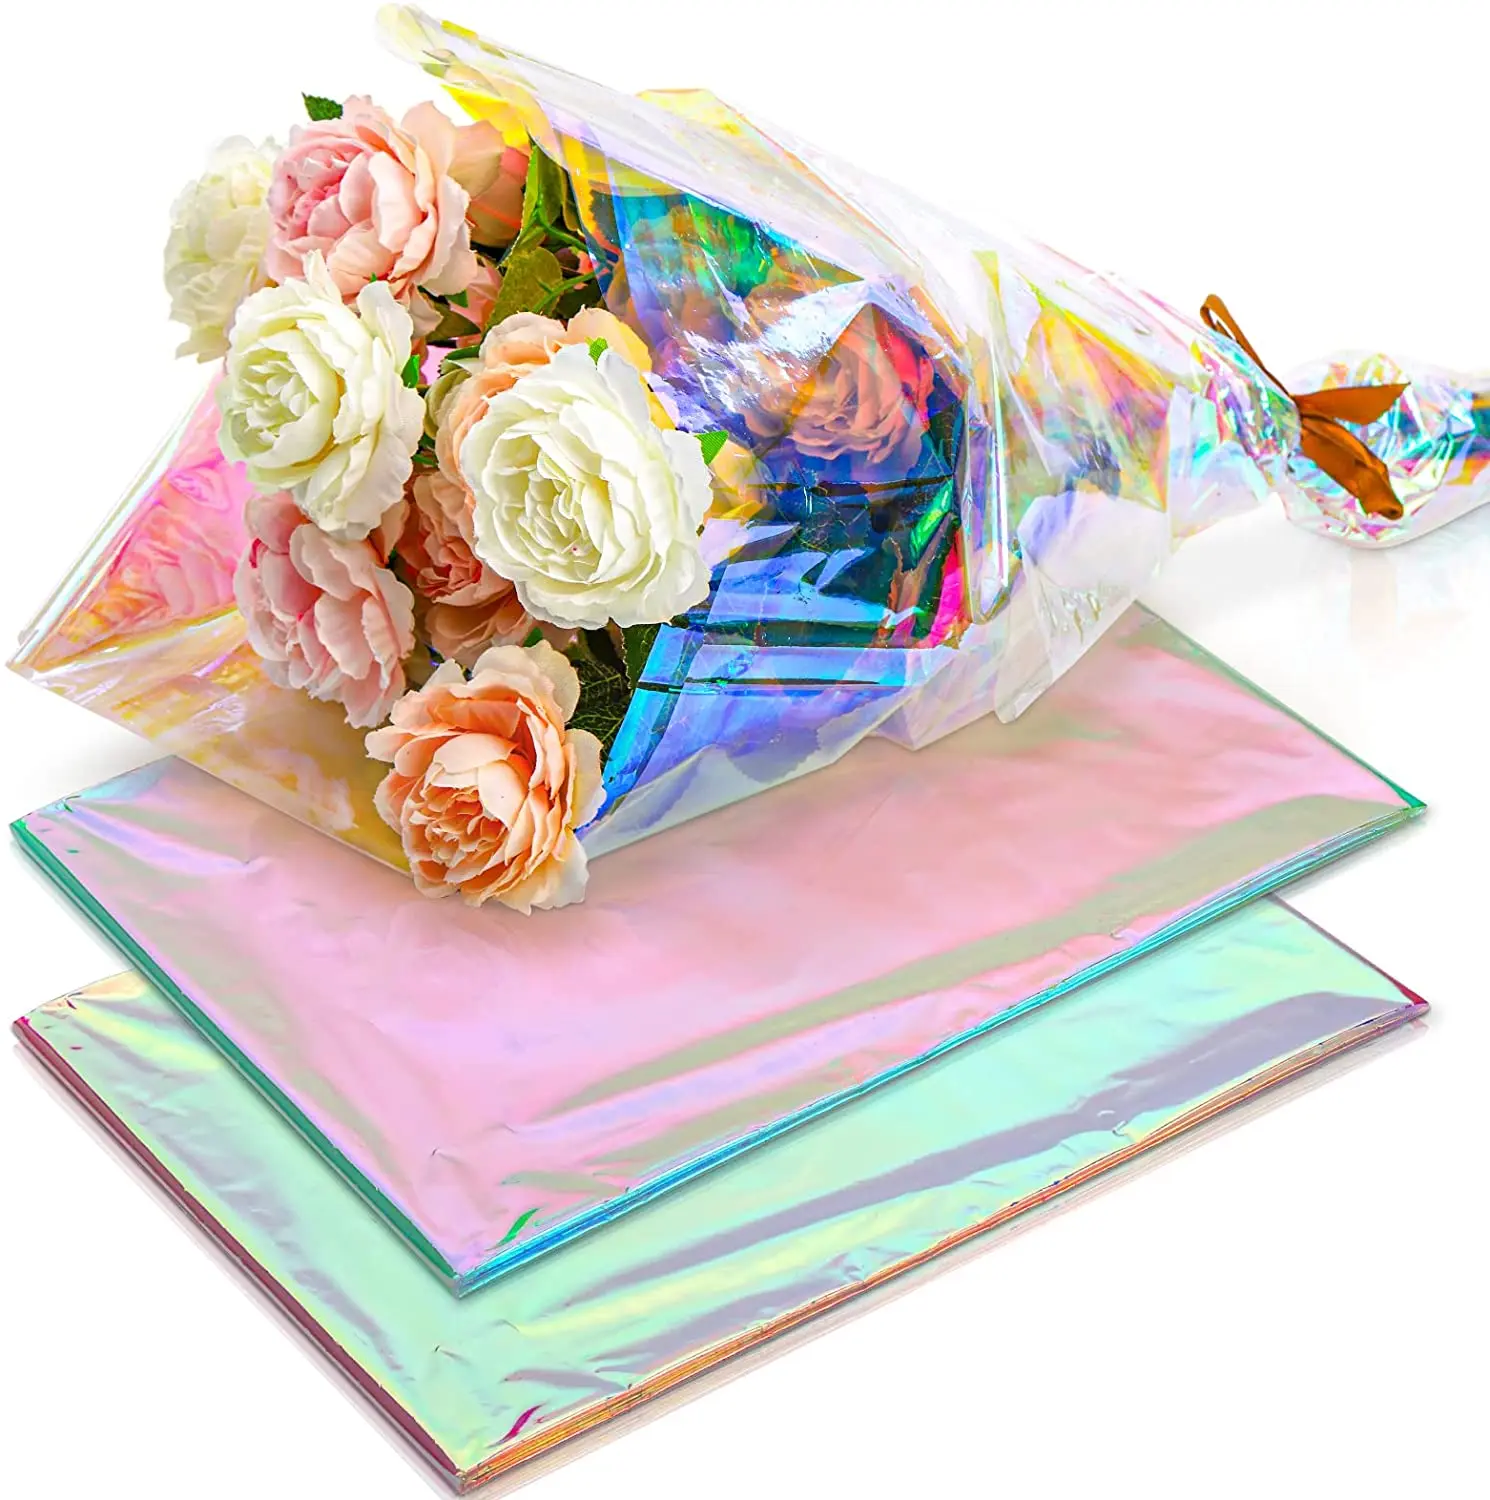 

Iridescent Cellophane Wrap Iridescent Film Rainbow Confetti Flowers Packaging Film for DIY Wrapping Decor centre piece fillings